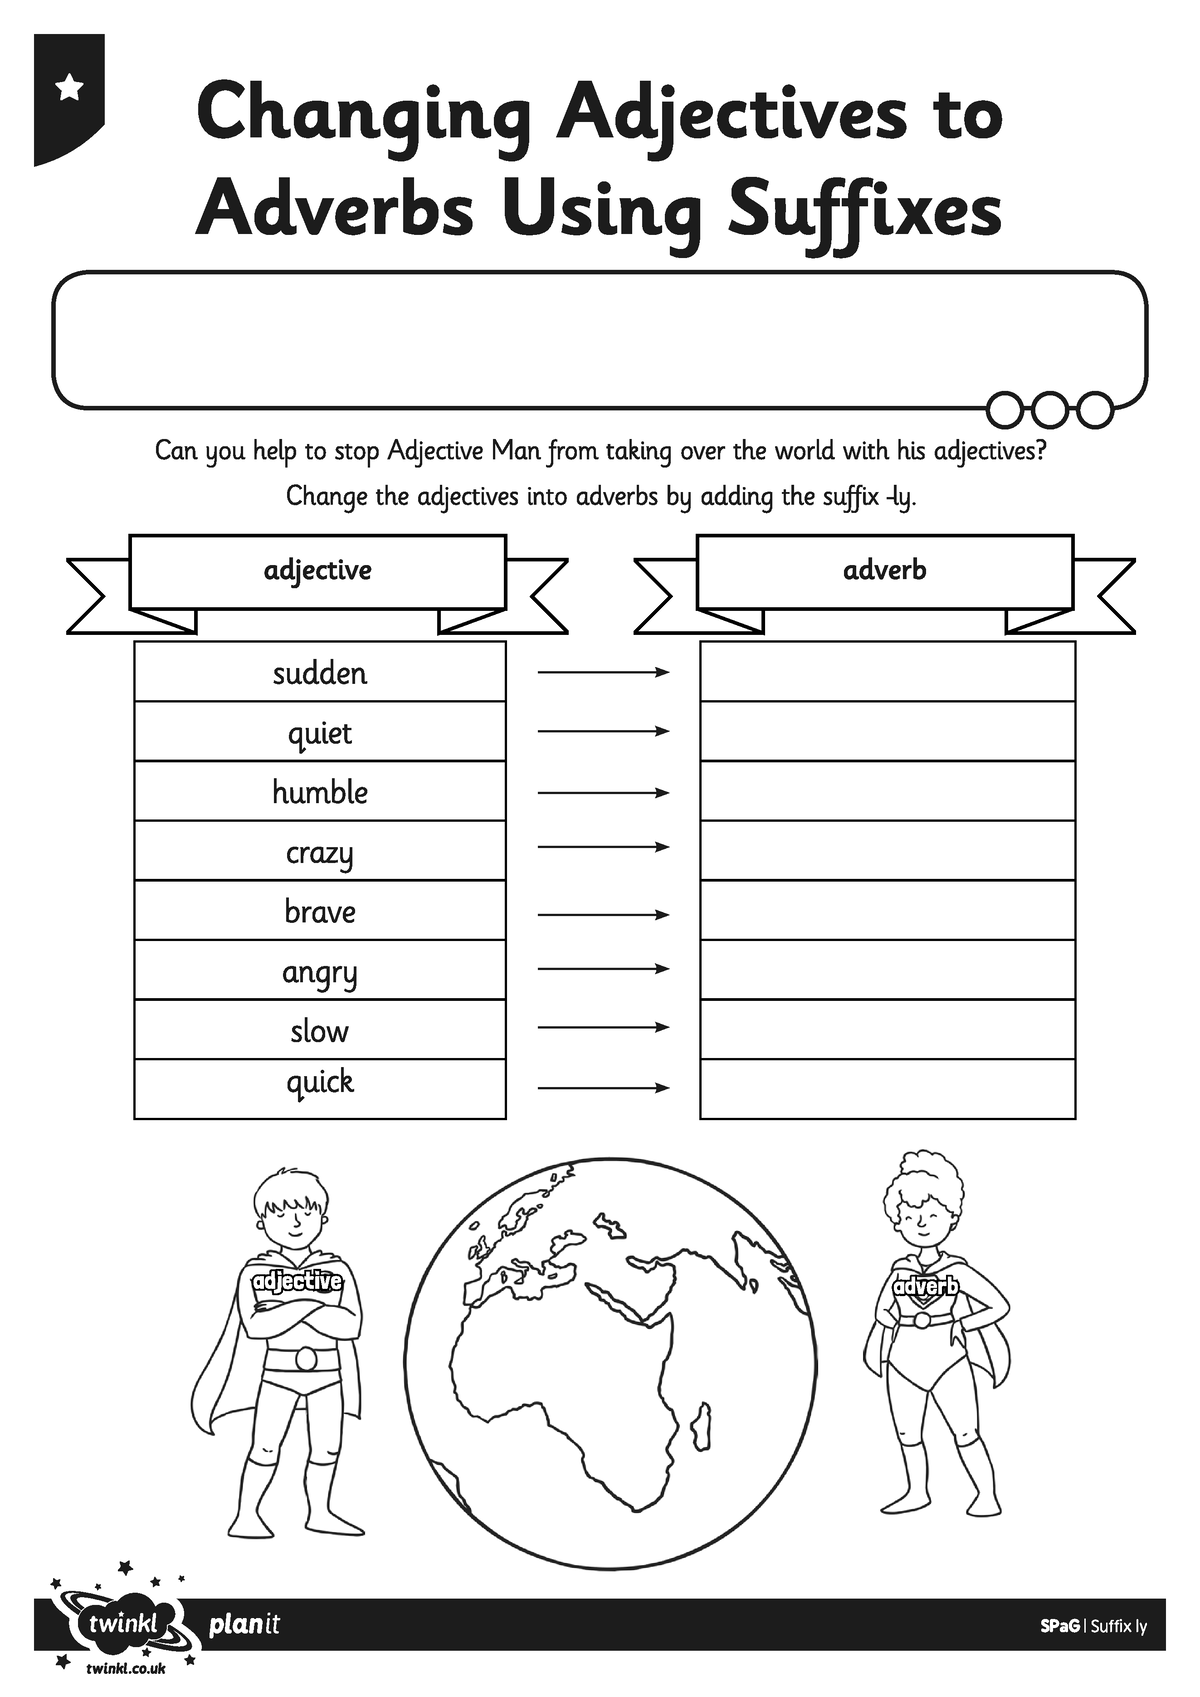 t2-e-2044-changing-adjectives-to-adverbs-using-suffixes-differentiated-activity-sheets-studocu